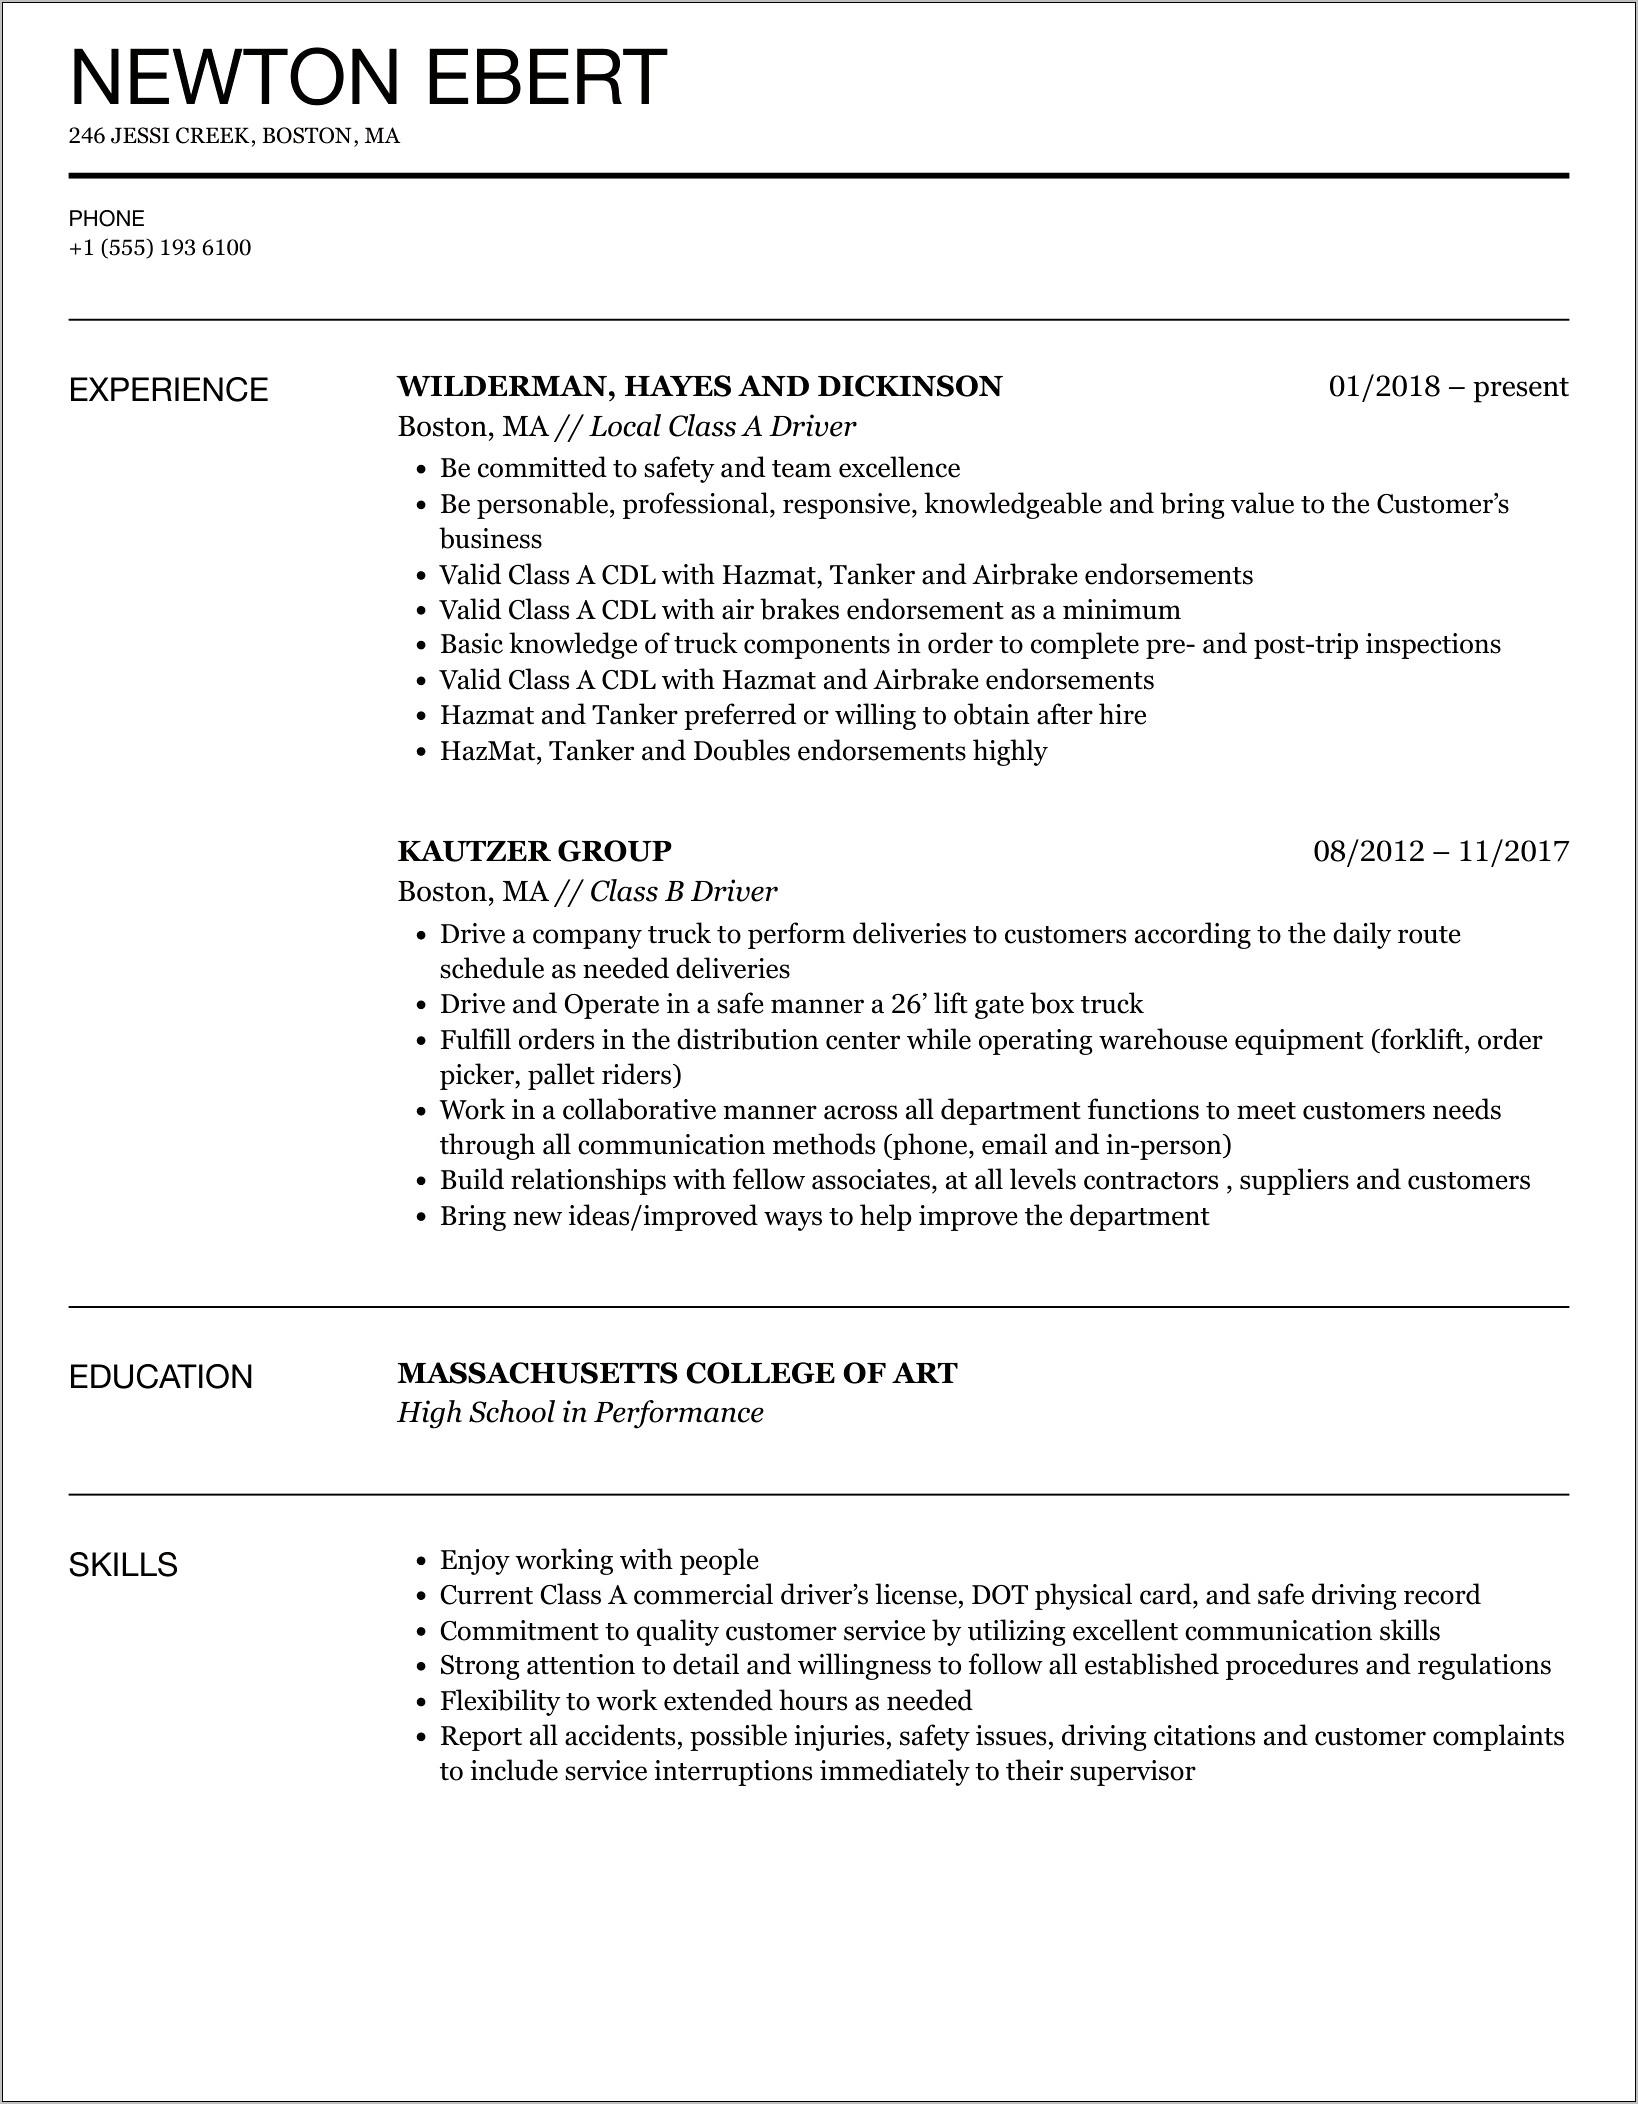 Sample Resume With Driving License